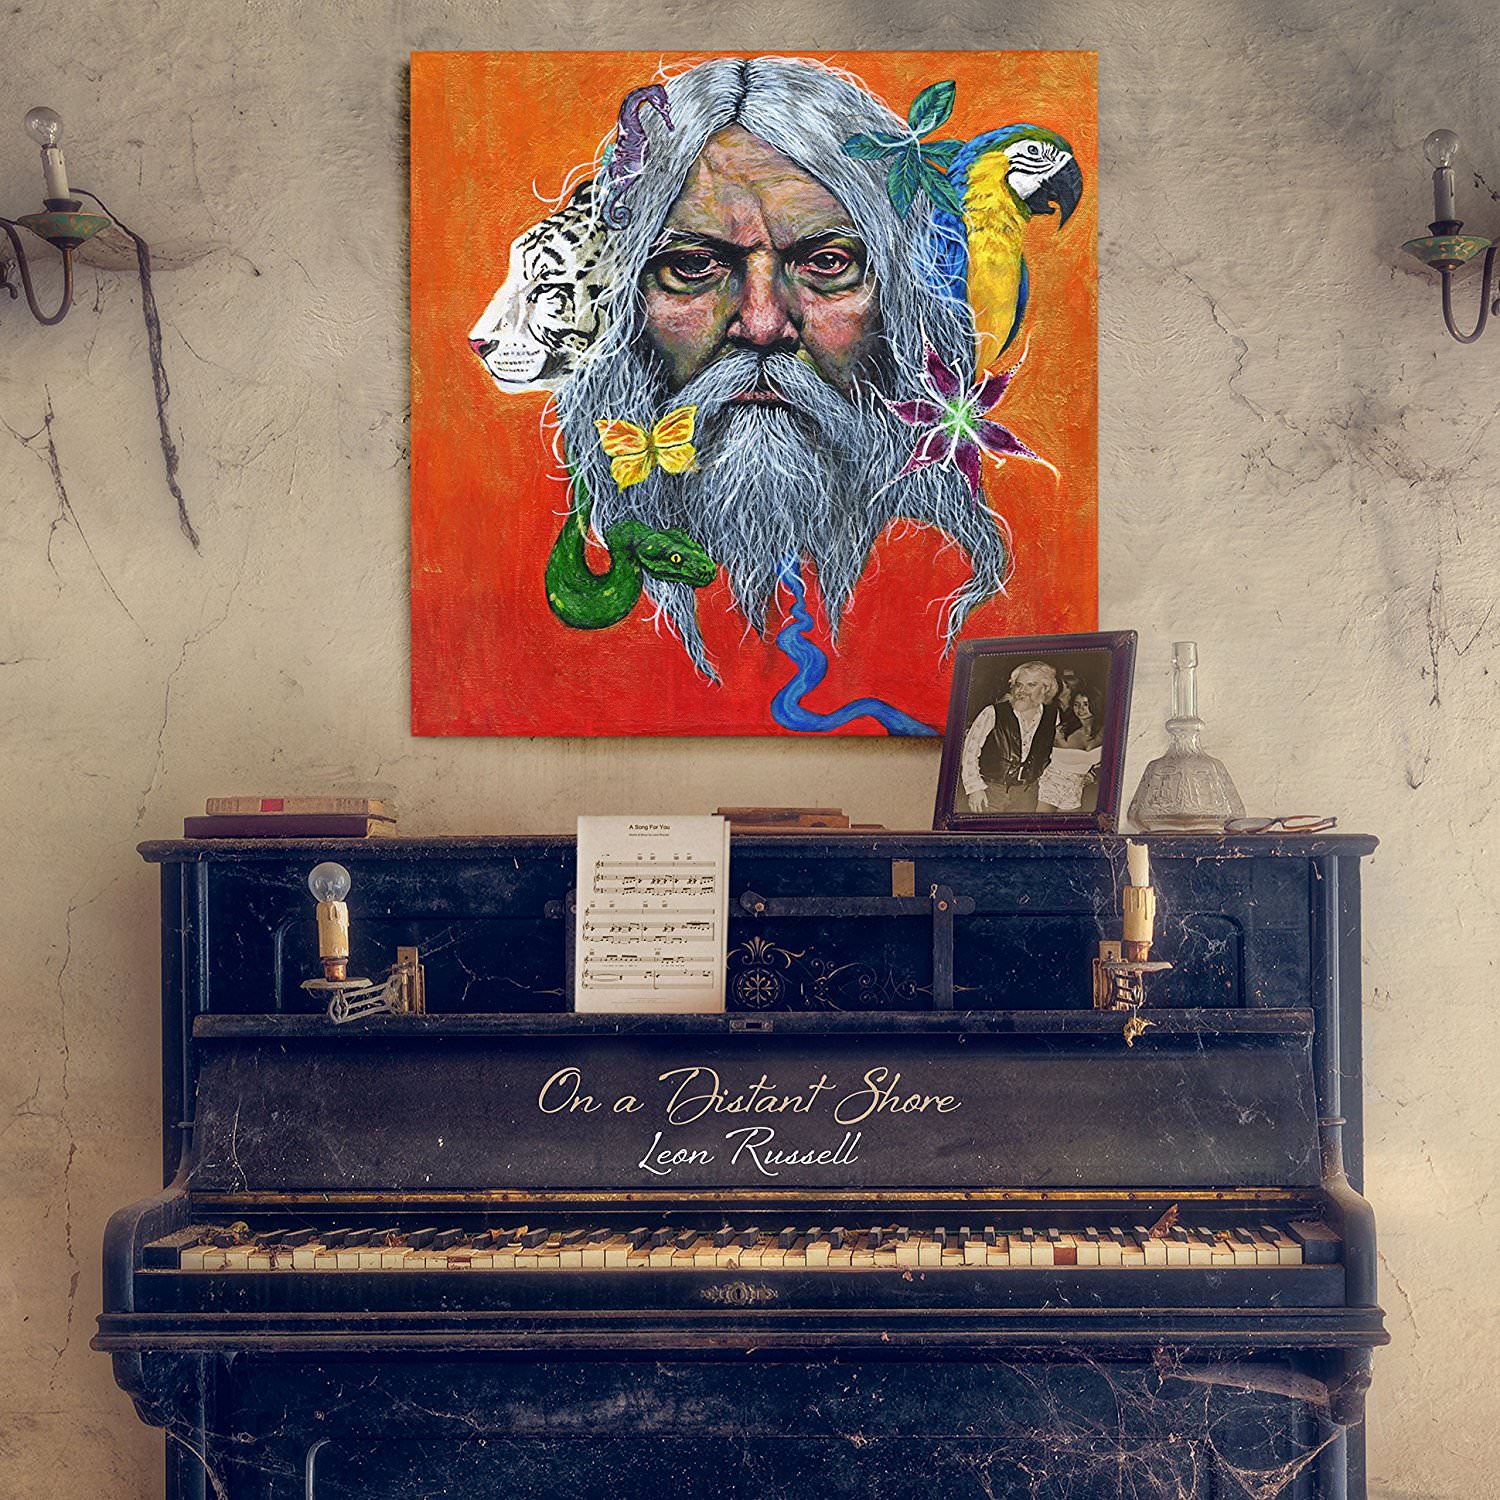 Leon Russell – On a Distant Shore (2017) [FLAC 24bit/44,1kHz]